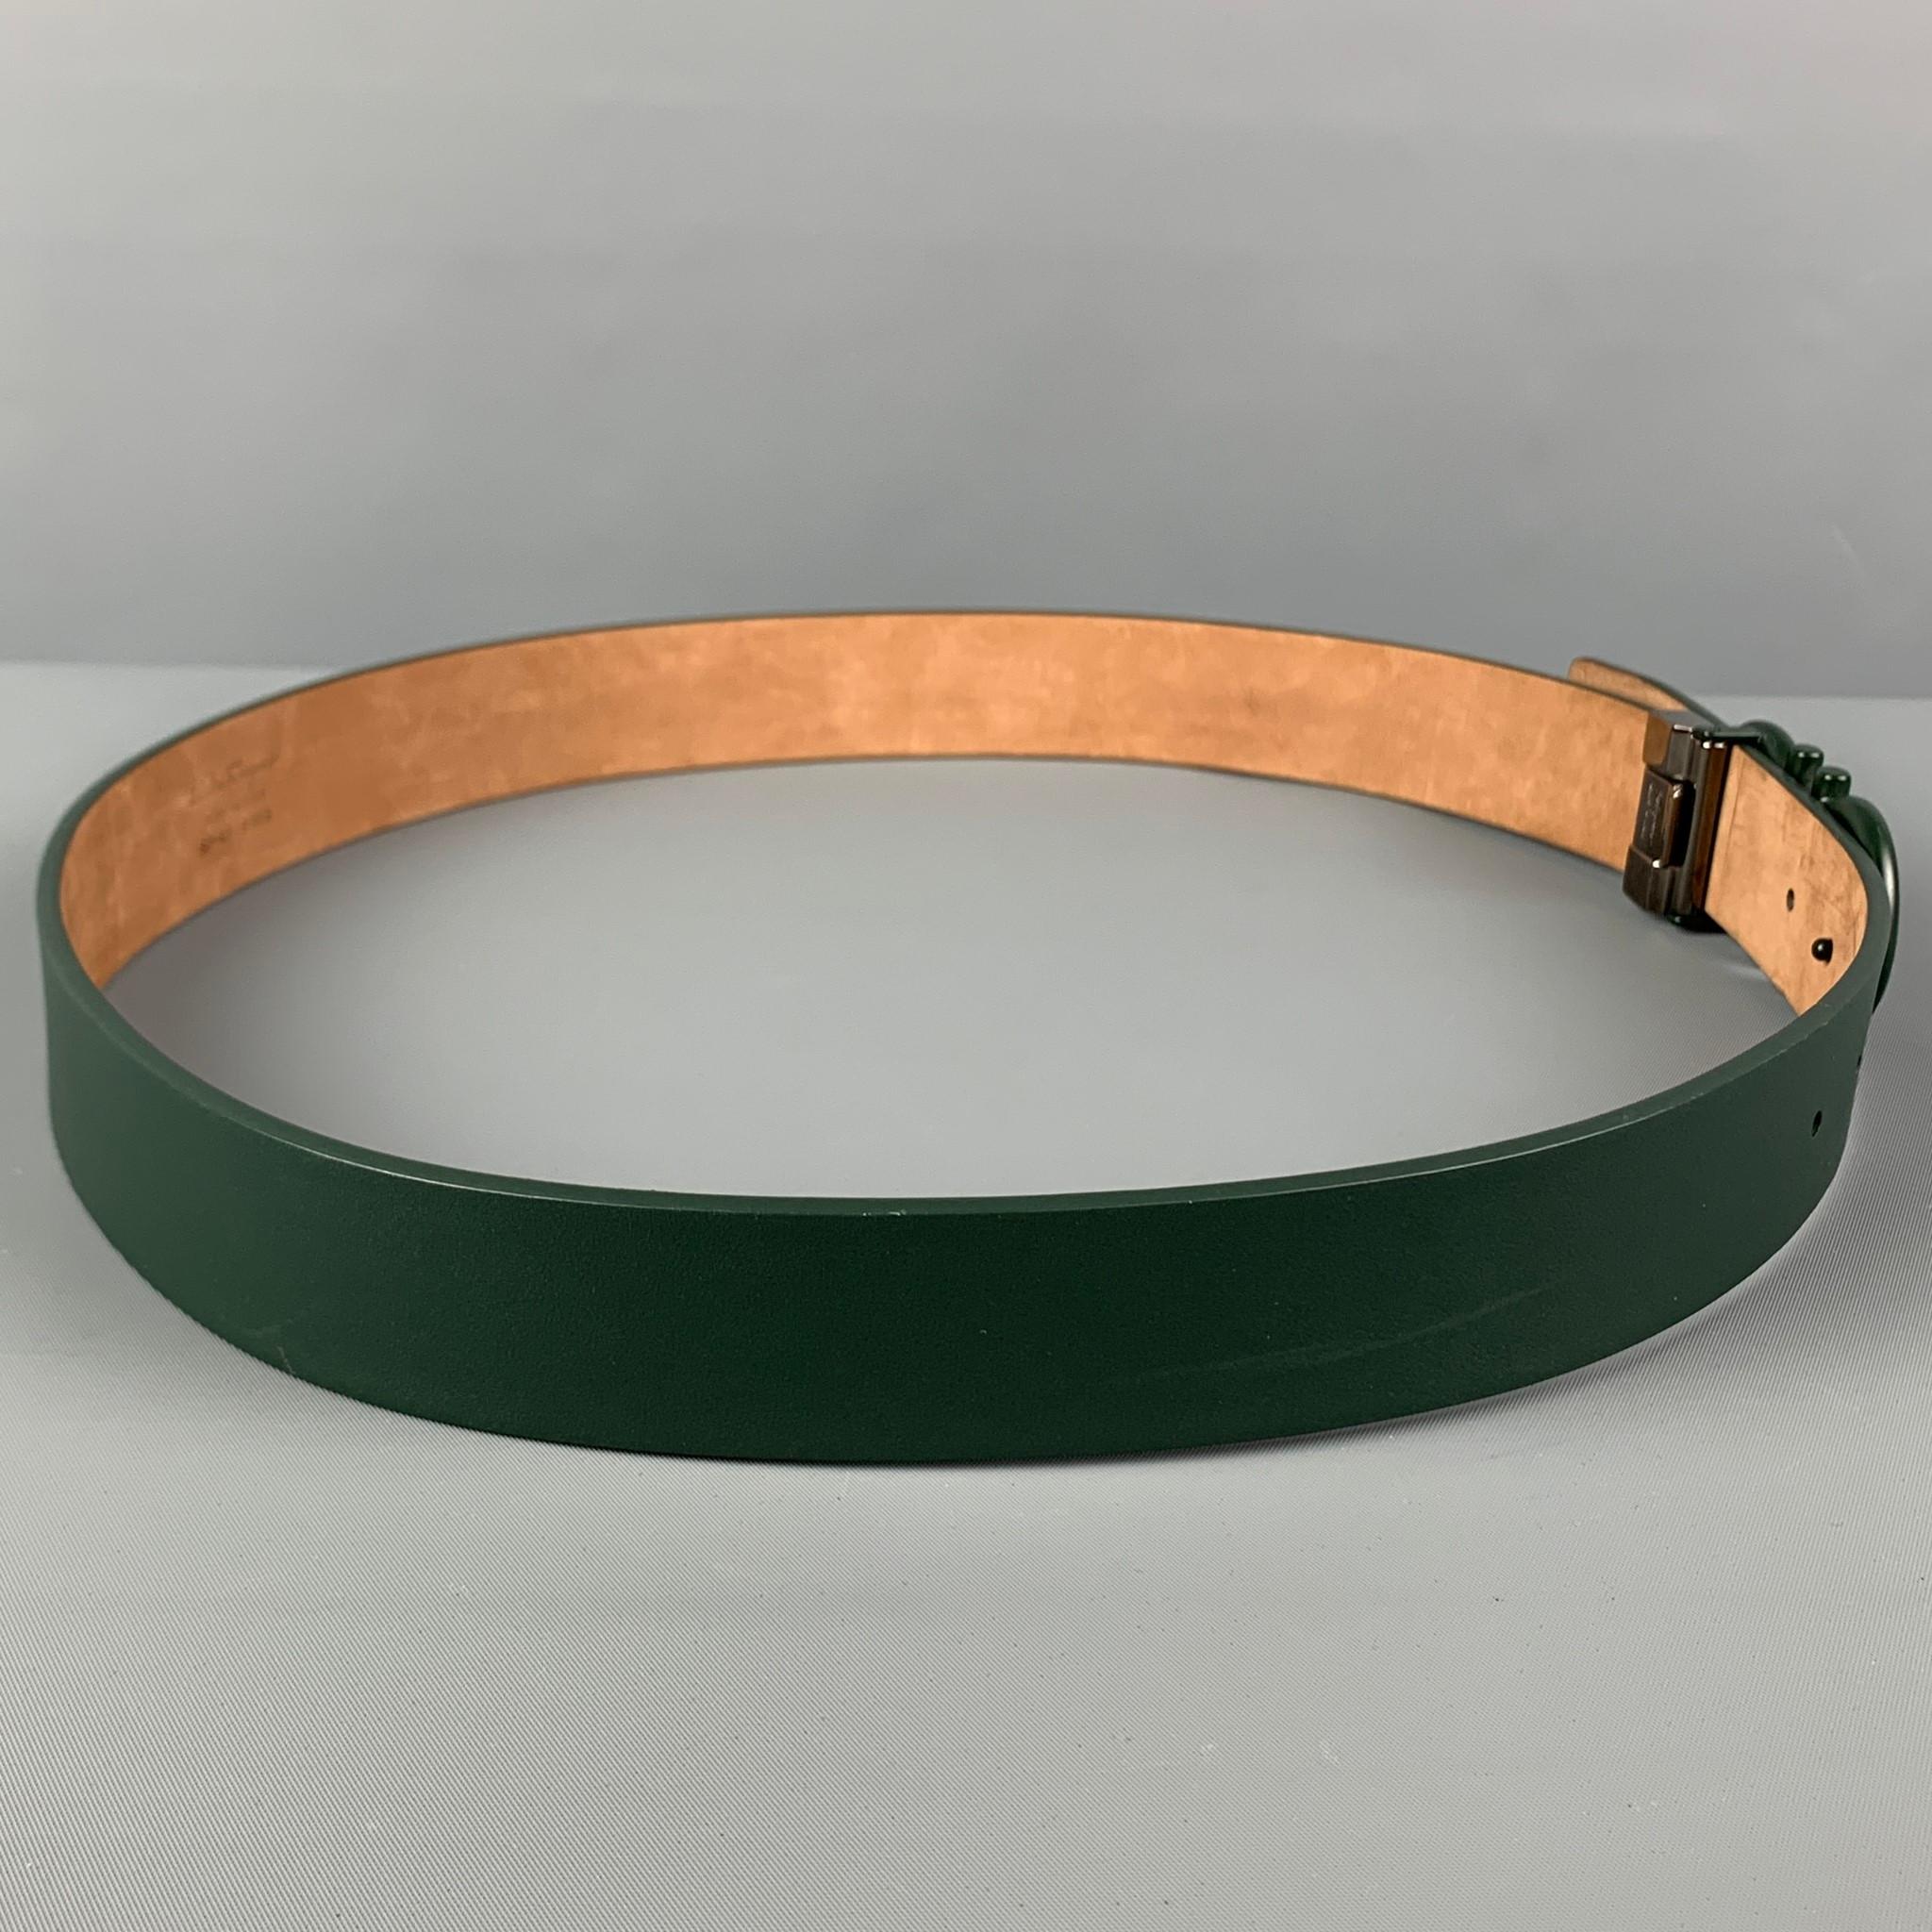 SALVATORE FERRAGAMO belt comes in a dark green leather featuring a dark green logo buckle closure. Made in Italy. 

Very Good Pre-Owned Condition.
Marked: SP-67 9955
Original Retail Price: $575.00

Length: 41 in.
Width: 1.25 in.
Fits: 34.5 in. -